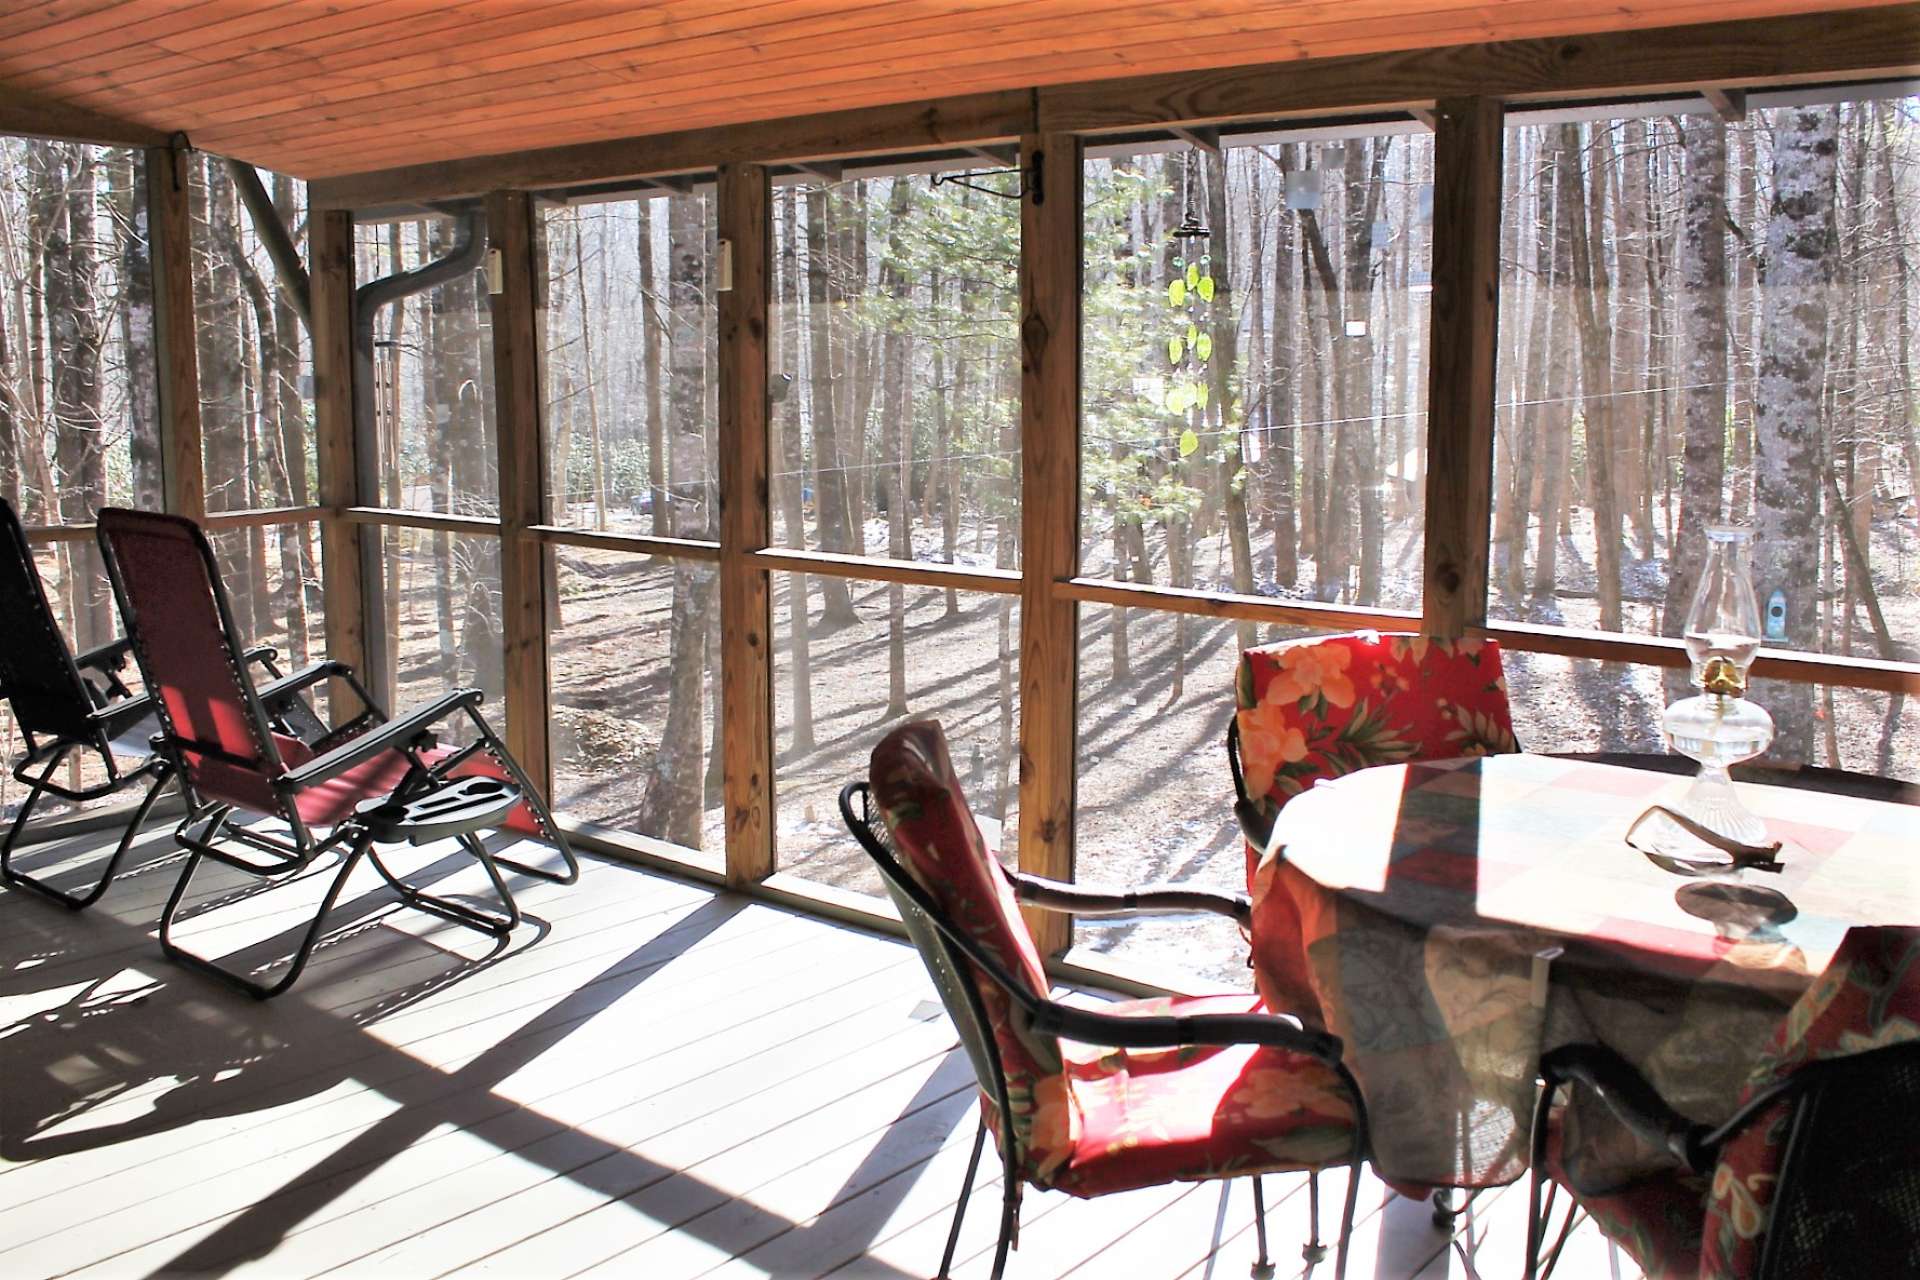 Covered screened porch is a great place to enjoy the backyard's beautiful wooded setting.